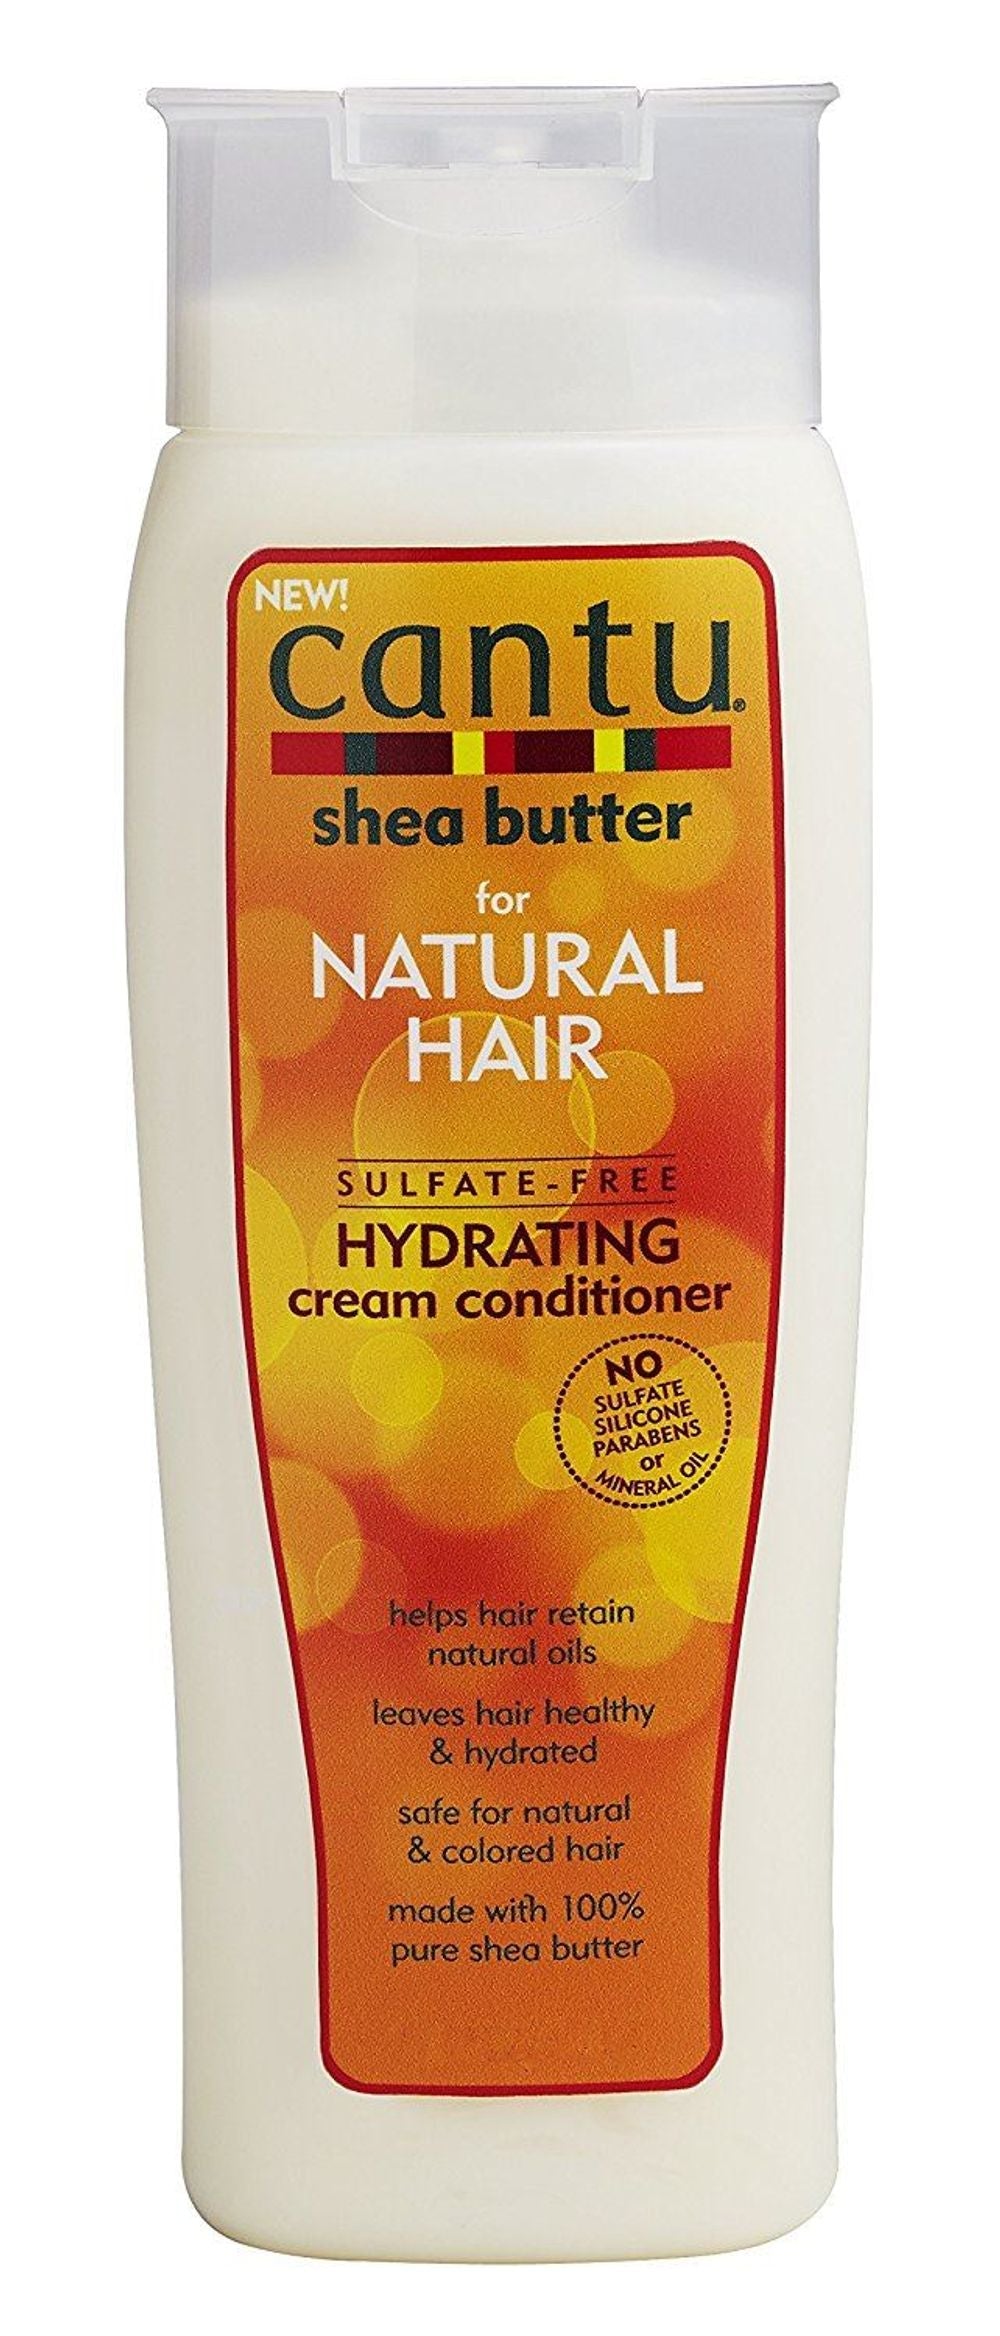 Cantu Shea Butter for Natural Hair Sulfate-Free Hydrating Cream Conditioner 400 ml TapClickBuy